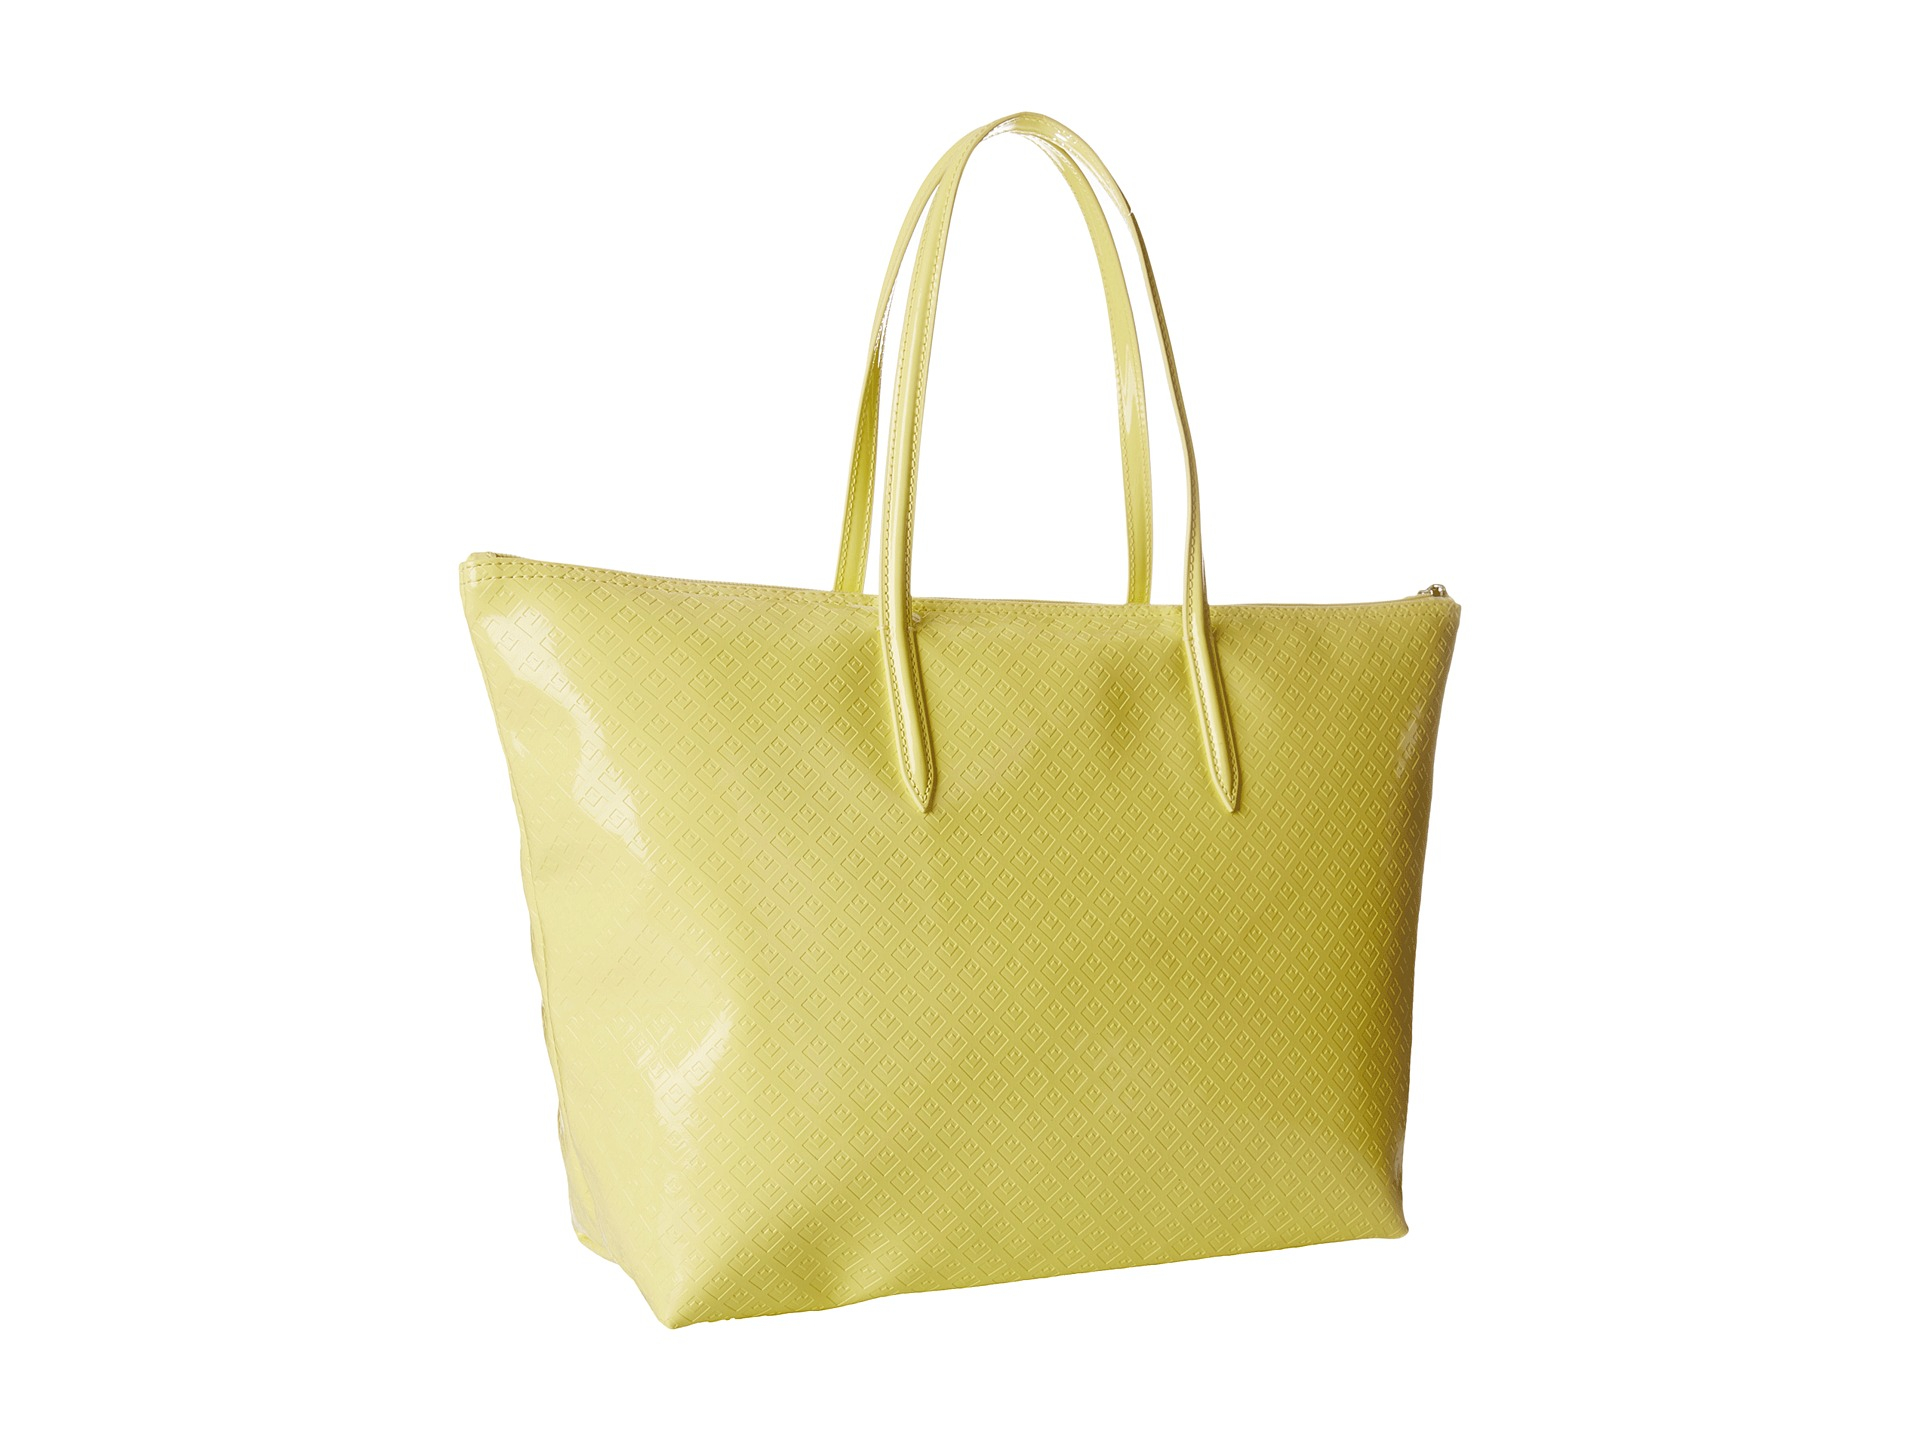 Download Lyst - Lacoste L.12.12 Glossy Large Shopping Bag in Yellow